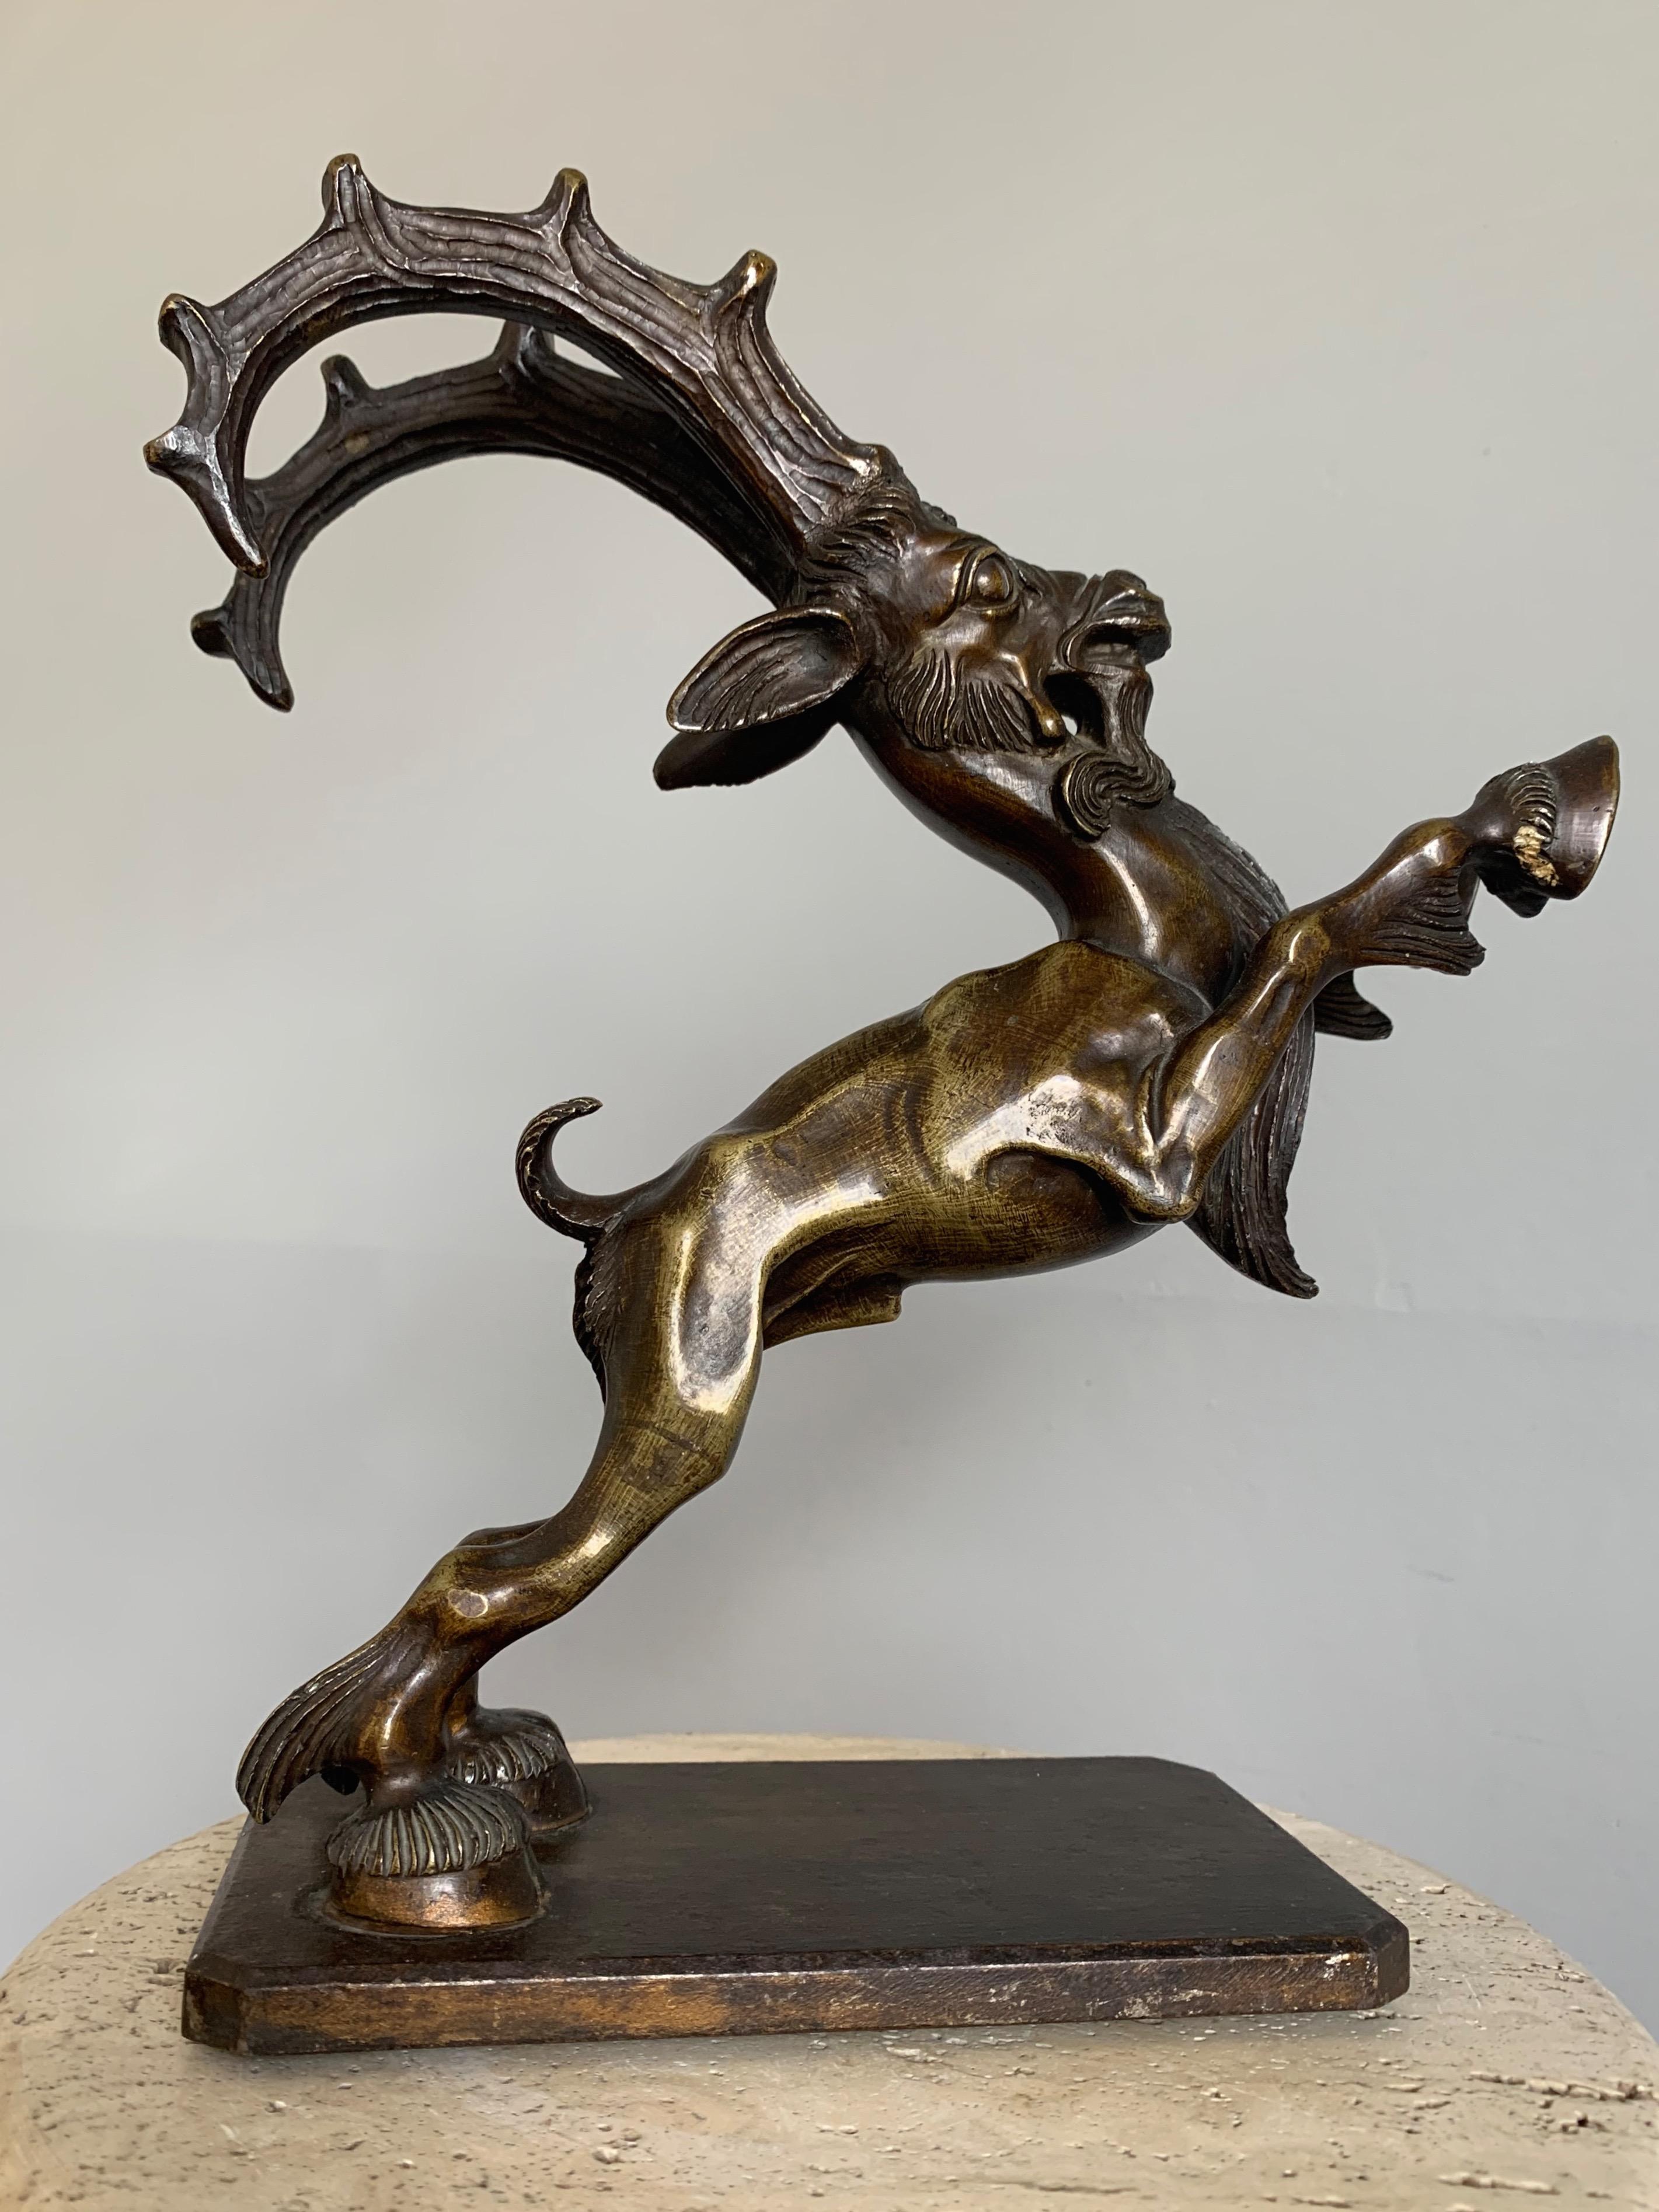 Artistic quality bronze sculpture with overdone features.

There must be collectors out there who immediately know the name of the artist who created this wonderful and rare style work of art. What makes this bronze capricorn/ibex stand out from